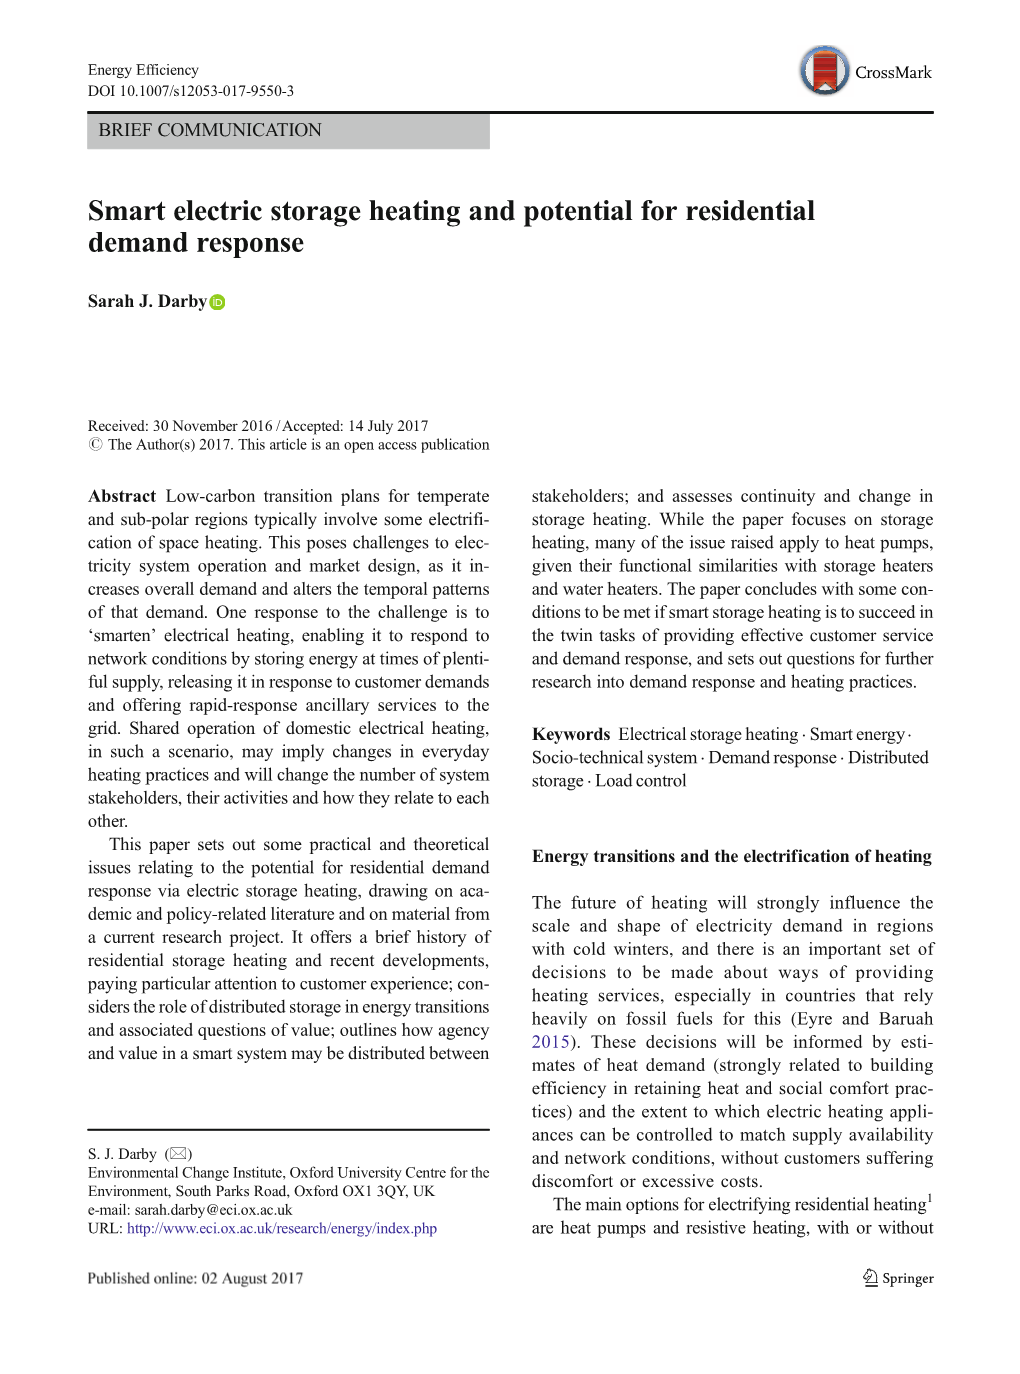 Smart Electric Storage Heating and Potential for Residential Demand Response